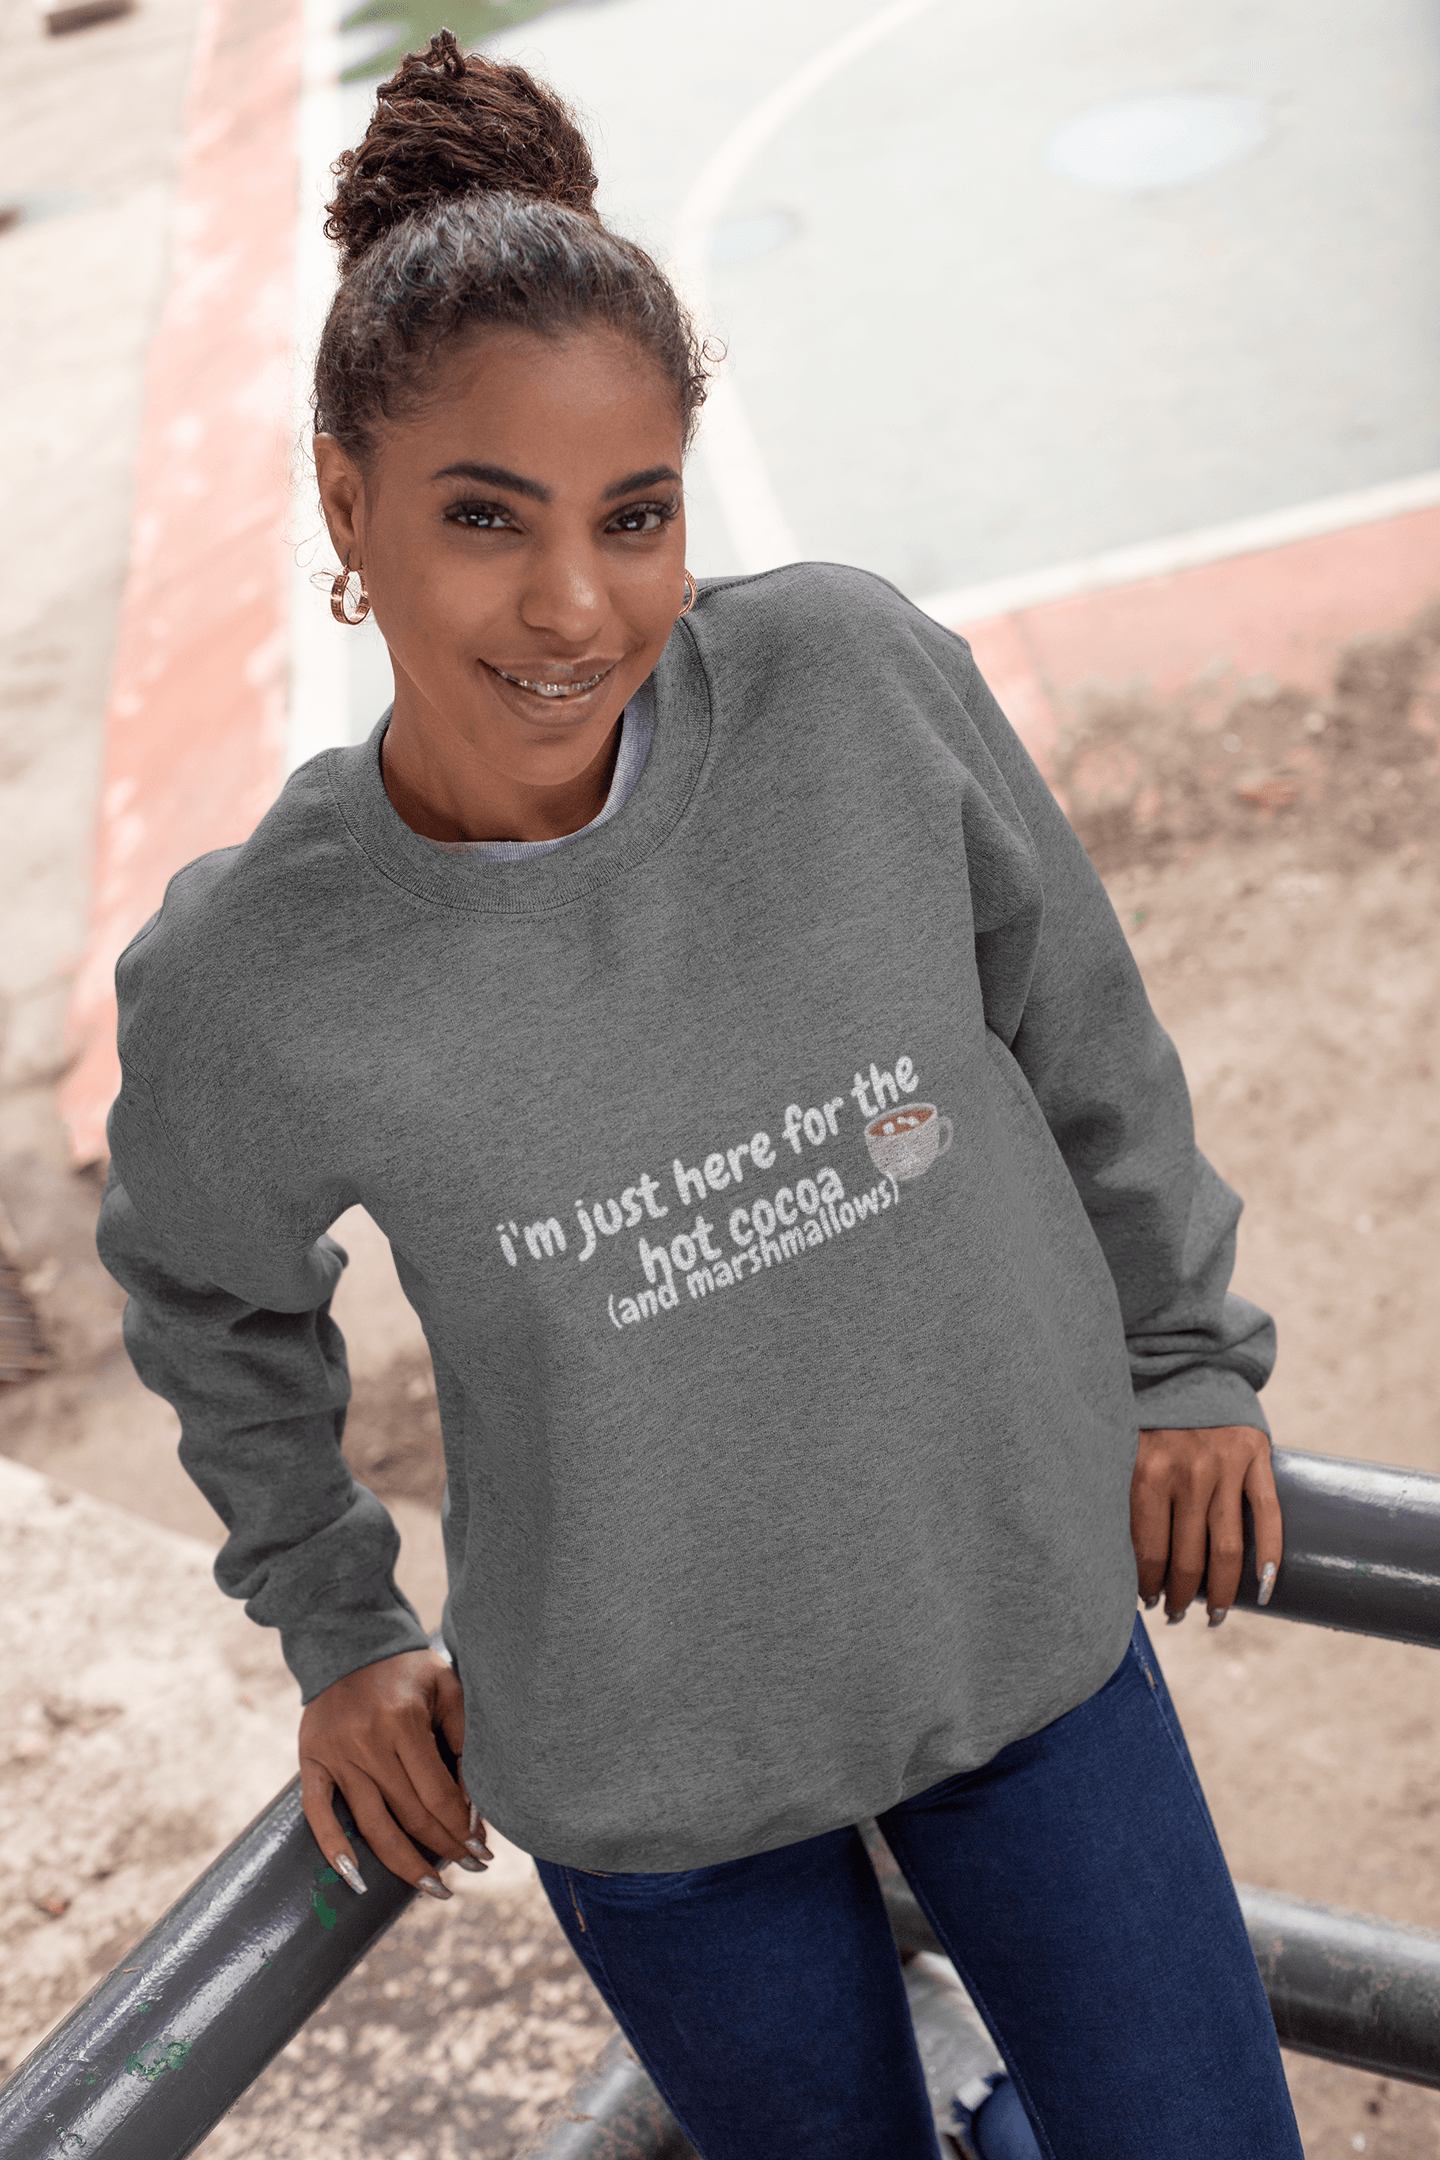 I'm Just Here for the Hot Cocoa Sweatshirt - Sharp Tact Kreativ | Tees & Gifts with Encouraging Messages to Brighten Your Day with a Bit of Wit